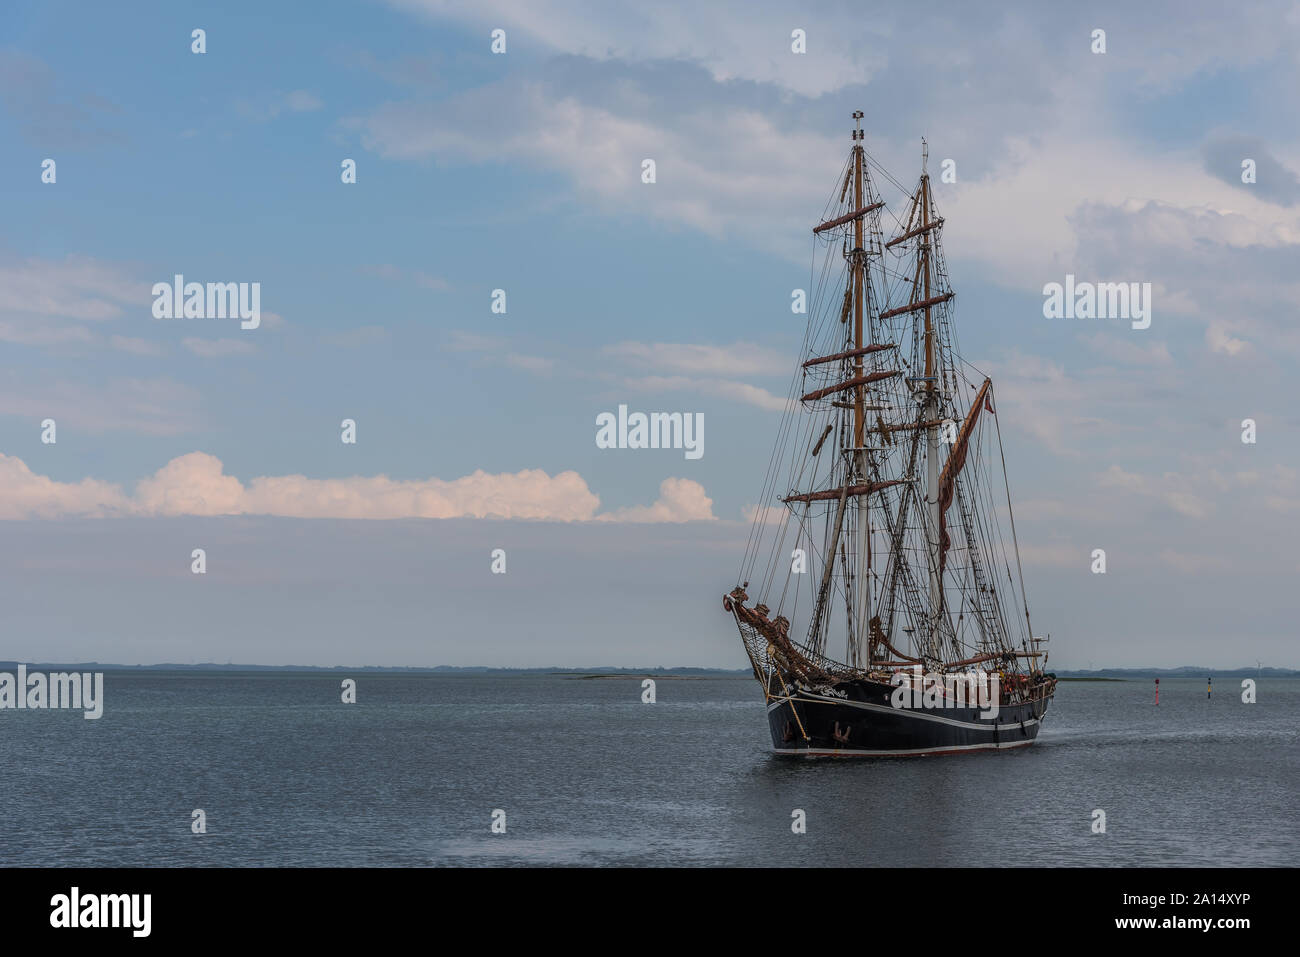 the brig eye of the wind in the sea, July 13, 2019 Stock Photo